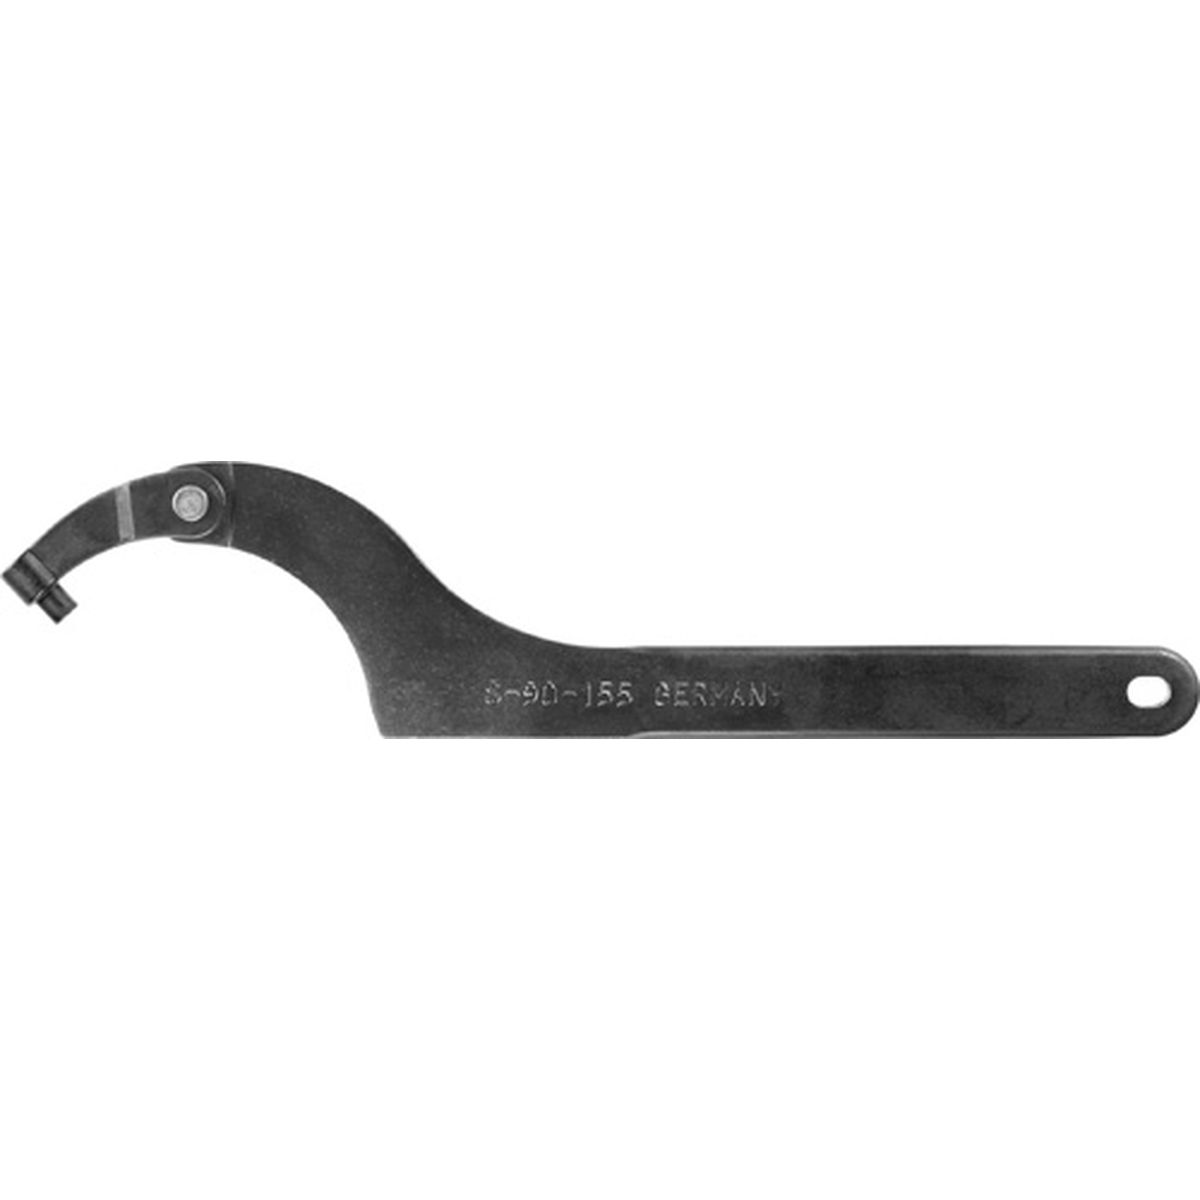 776SC 90-155x6 Hinged hook wrench wi th pin AMF